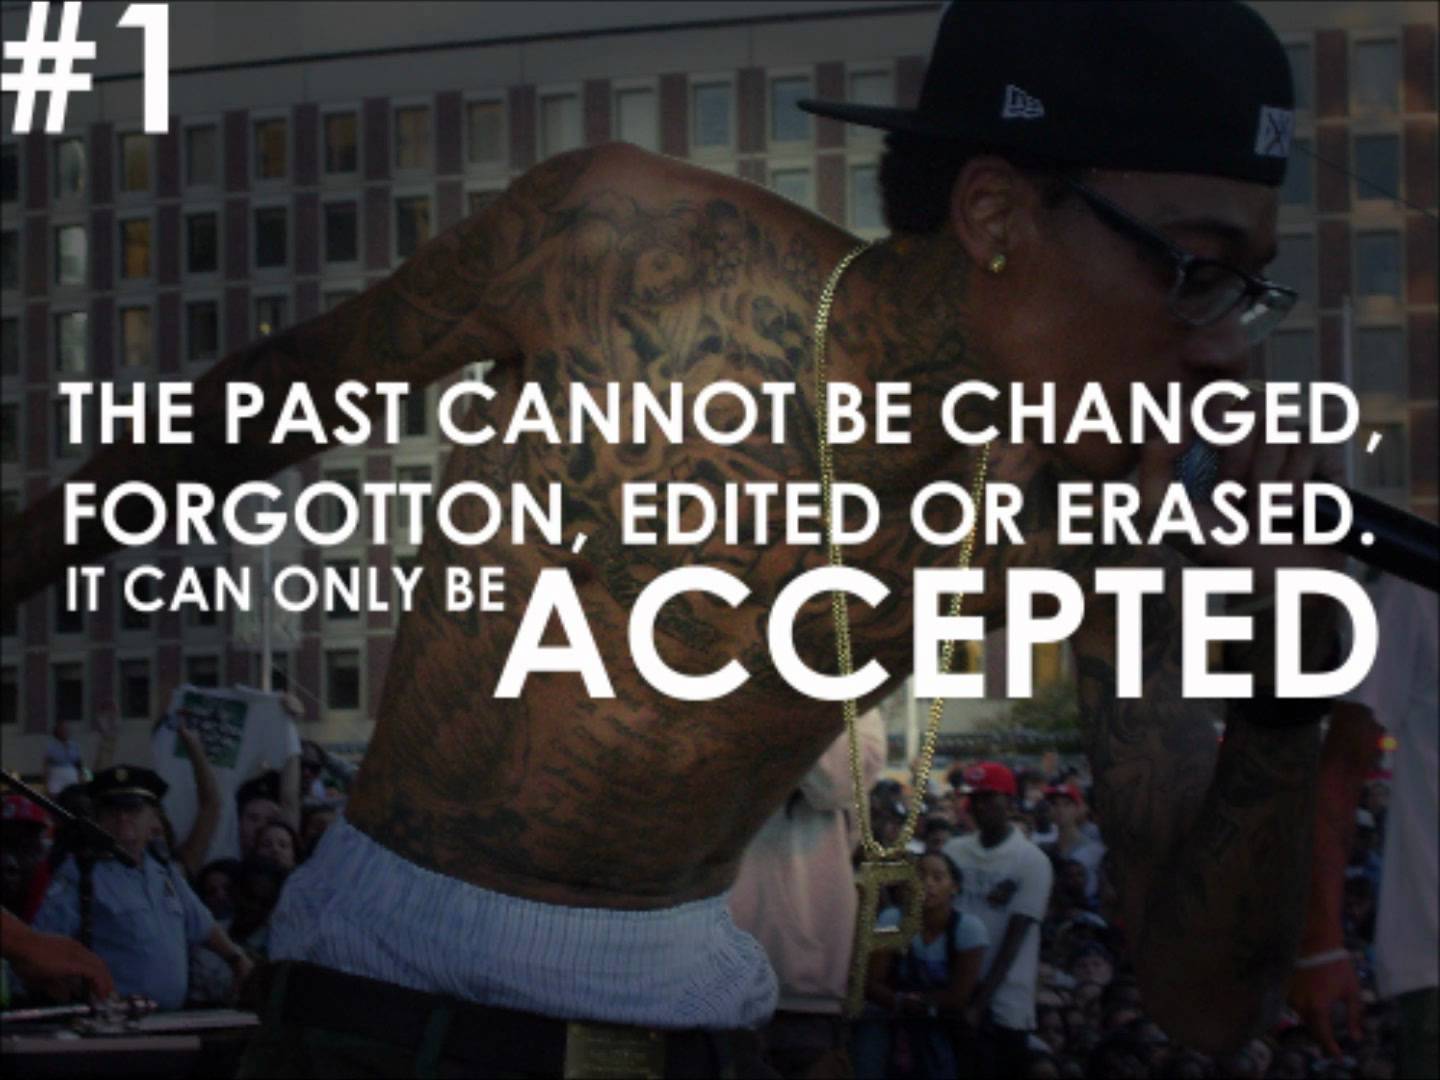 Best Wiz Khalifa Quotes about Love and Life with Image